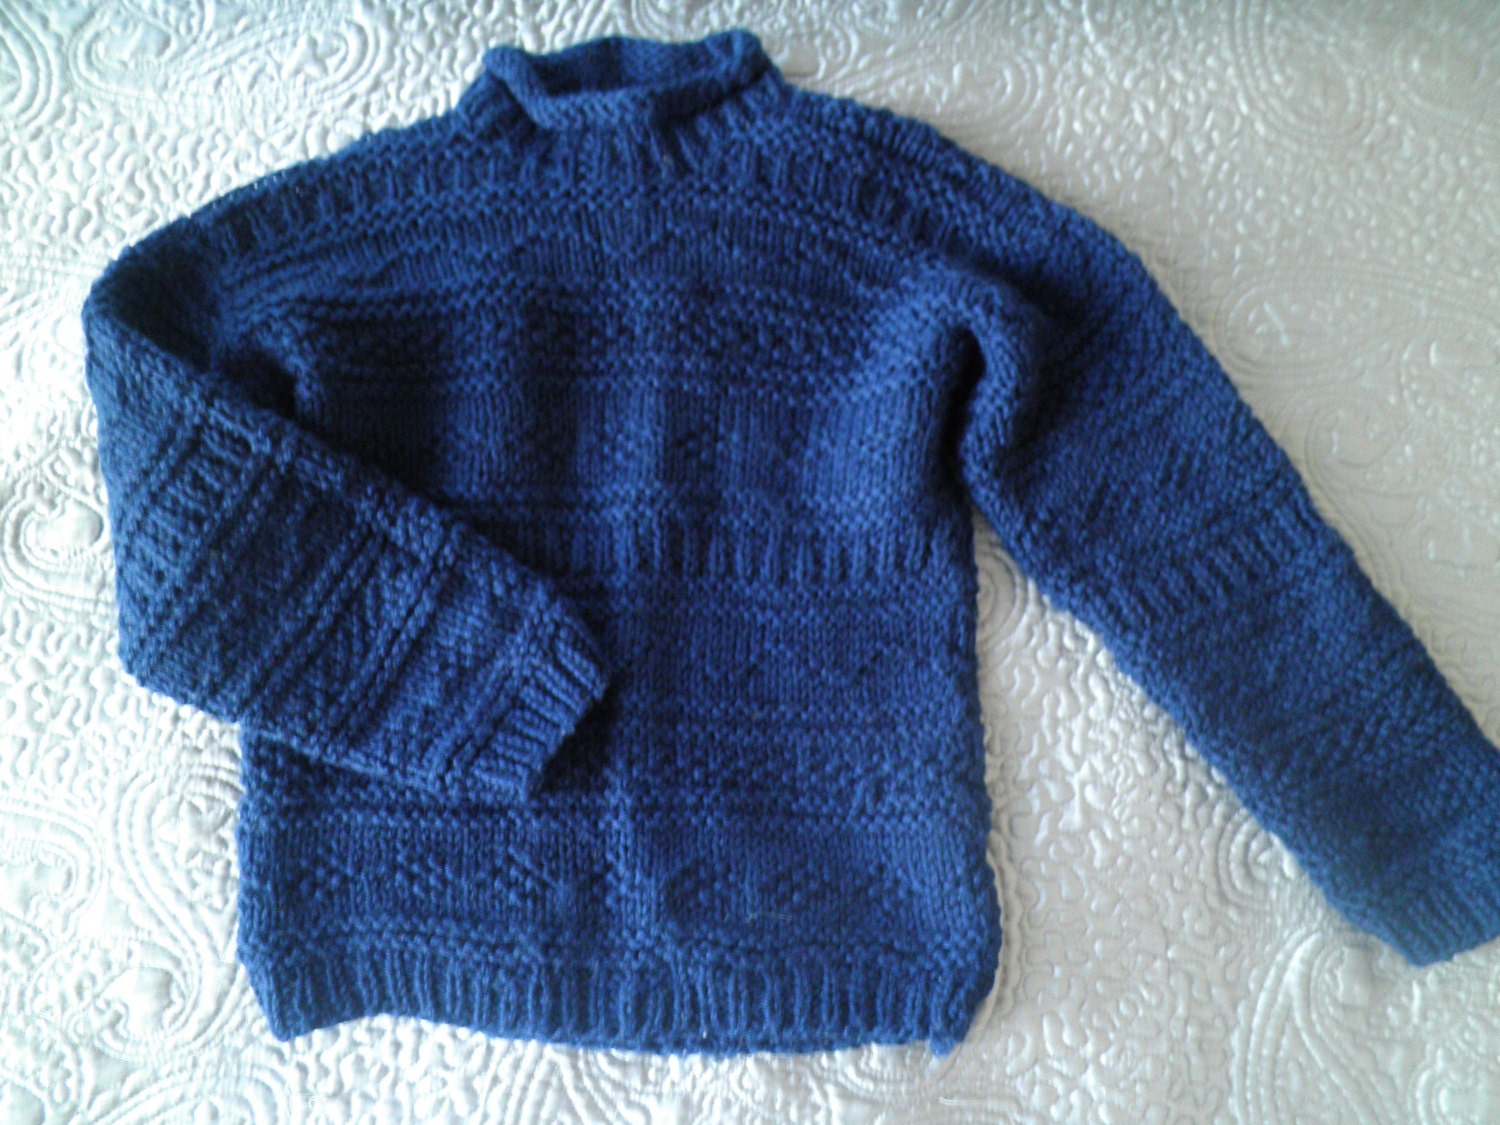 Traditional gansey sweater but made in acrylic for softness